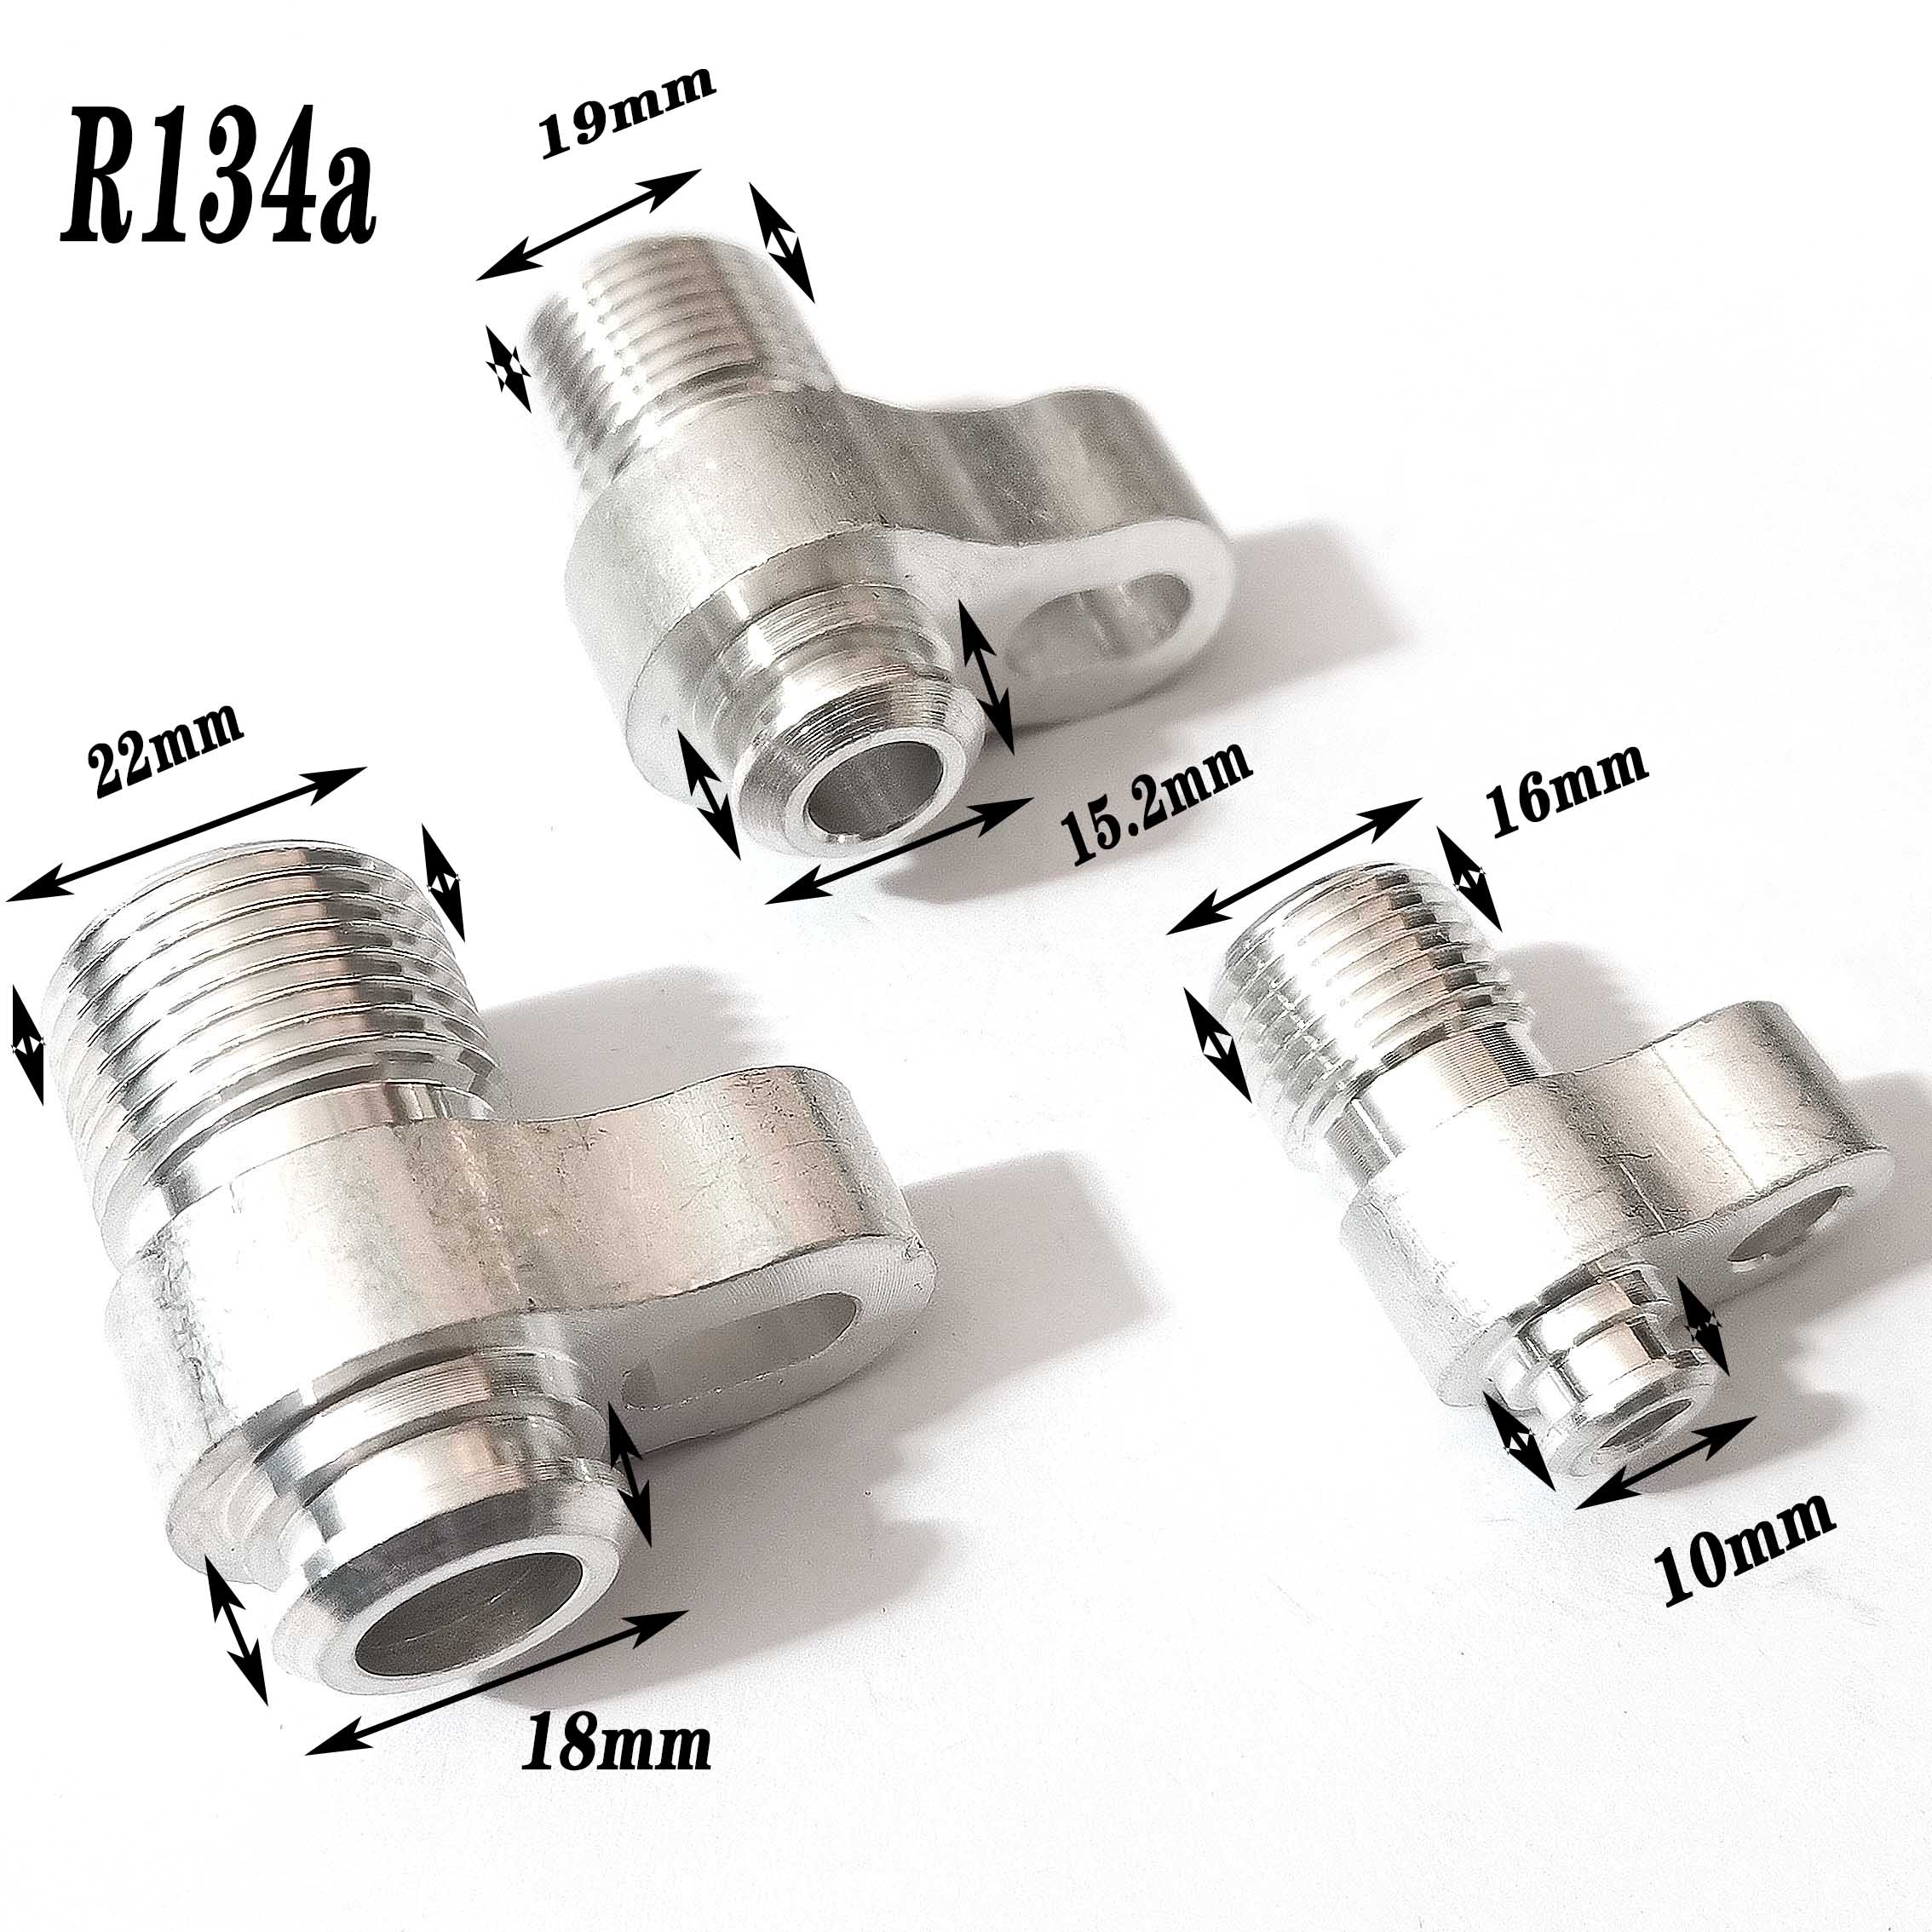 (3PCS) Automotive air conditioning compressor pipe fittings/air conditioning hose aluminum Joints R134a 3/8 1/2 5/8 connector